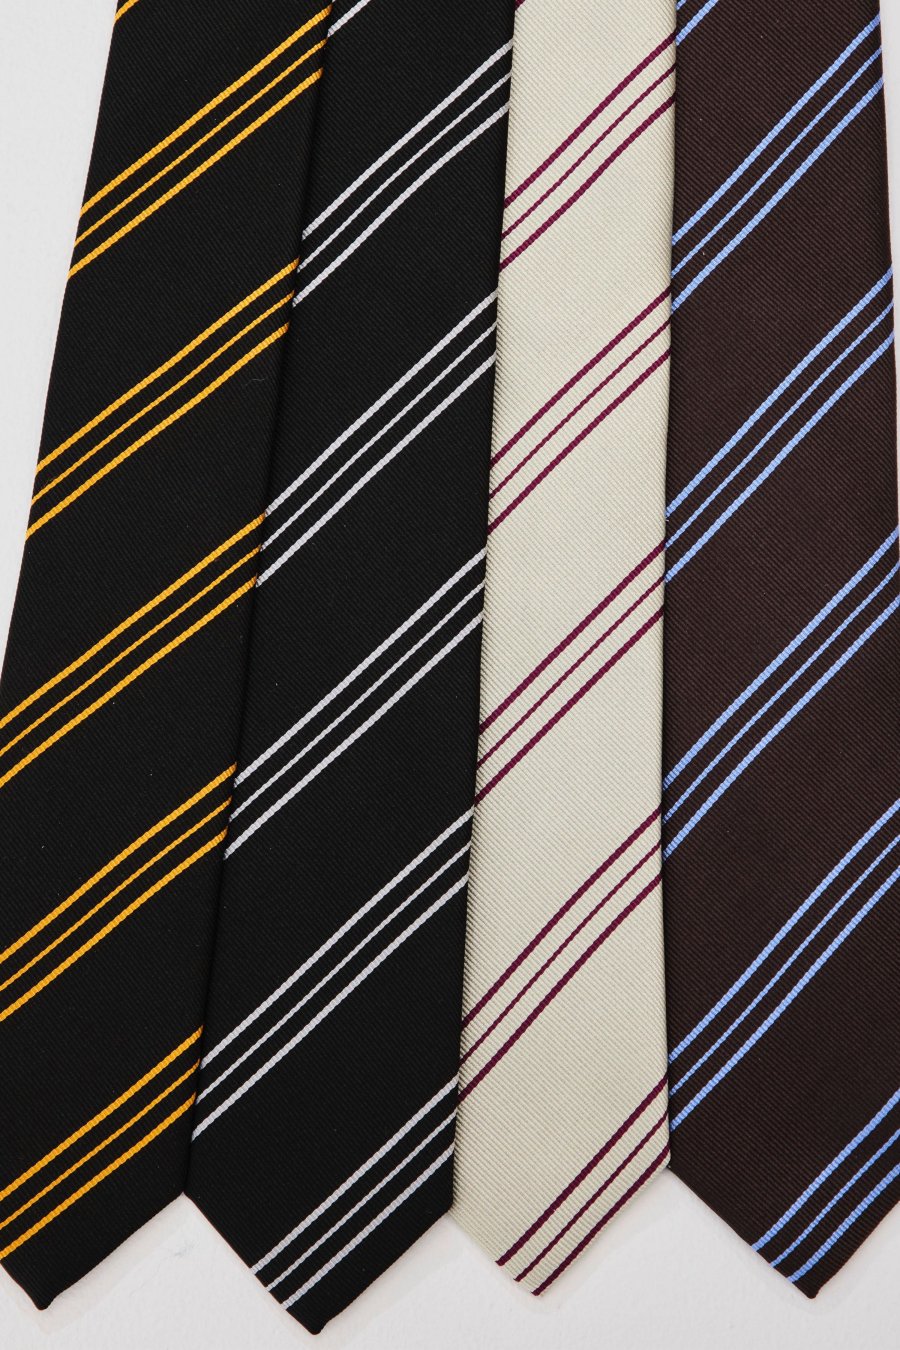 LITTLEBIG 23ss Resimental Tie 2( Black/Orange or Beige/Red or Brown/Blue )<img class='new_mark_img2' src='https://img.shop-pro.jp/img/new/icons15.gif' style='border:none;display:inline;margin:0px;padding:0px;width:auto;' />